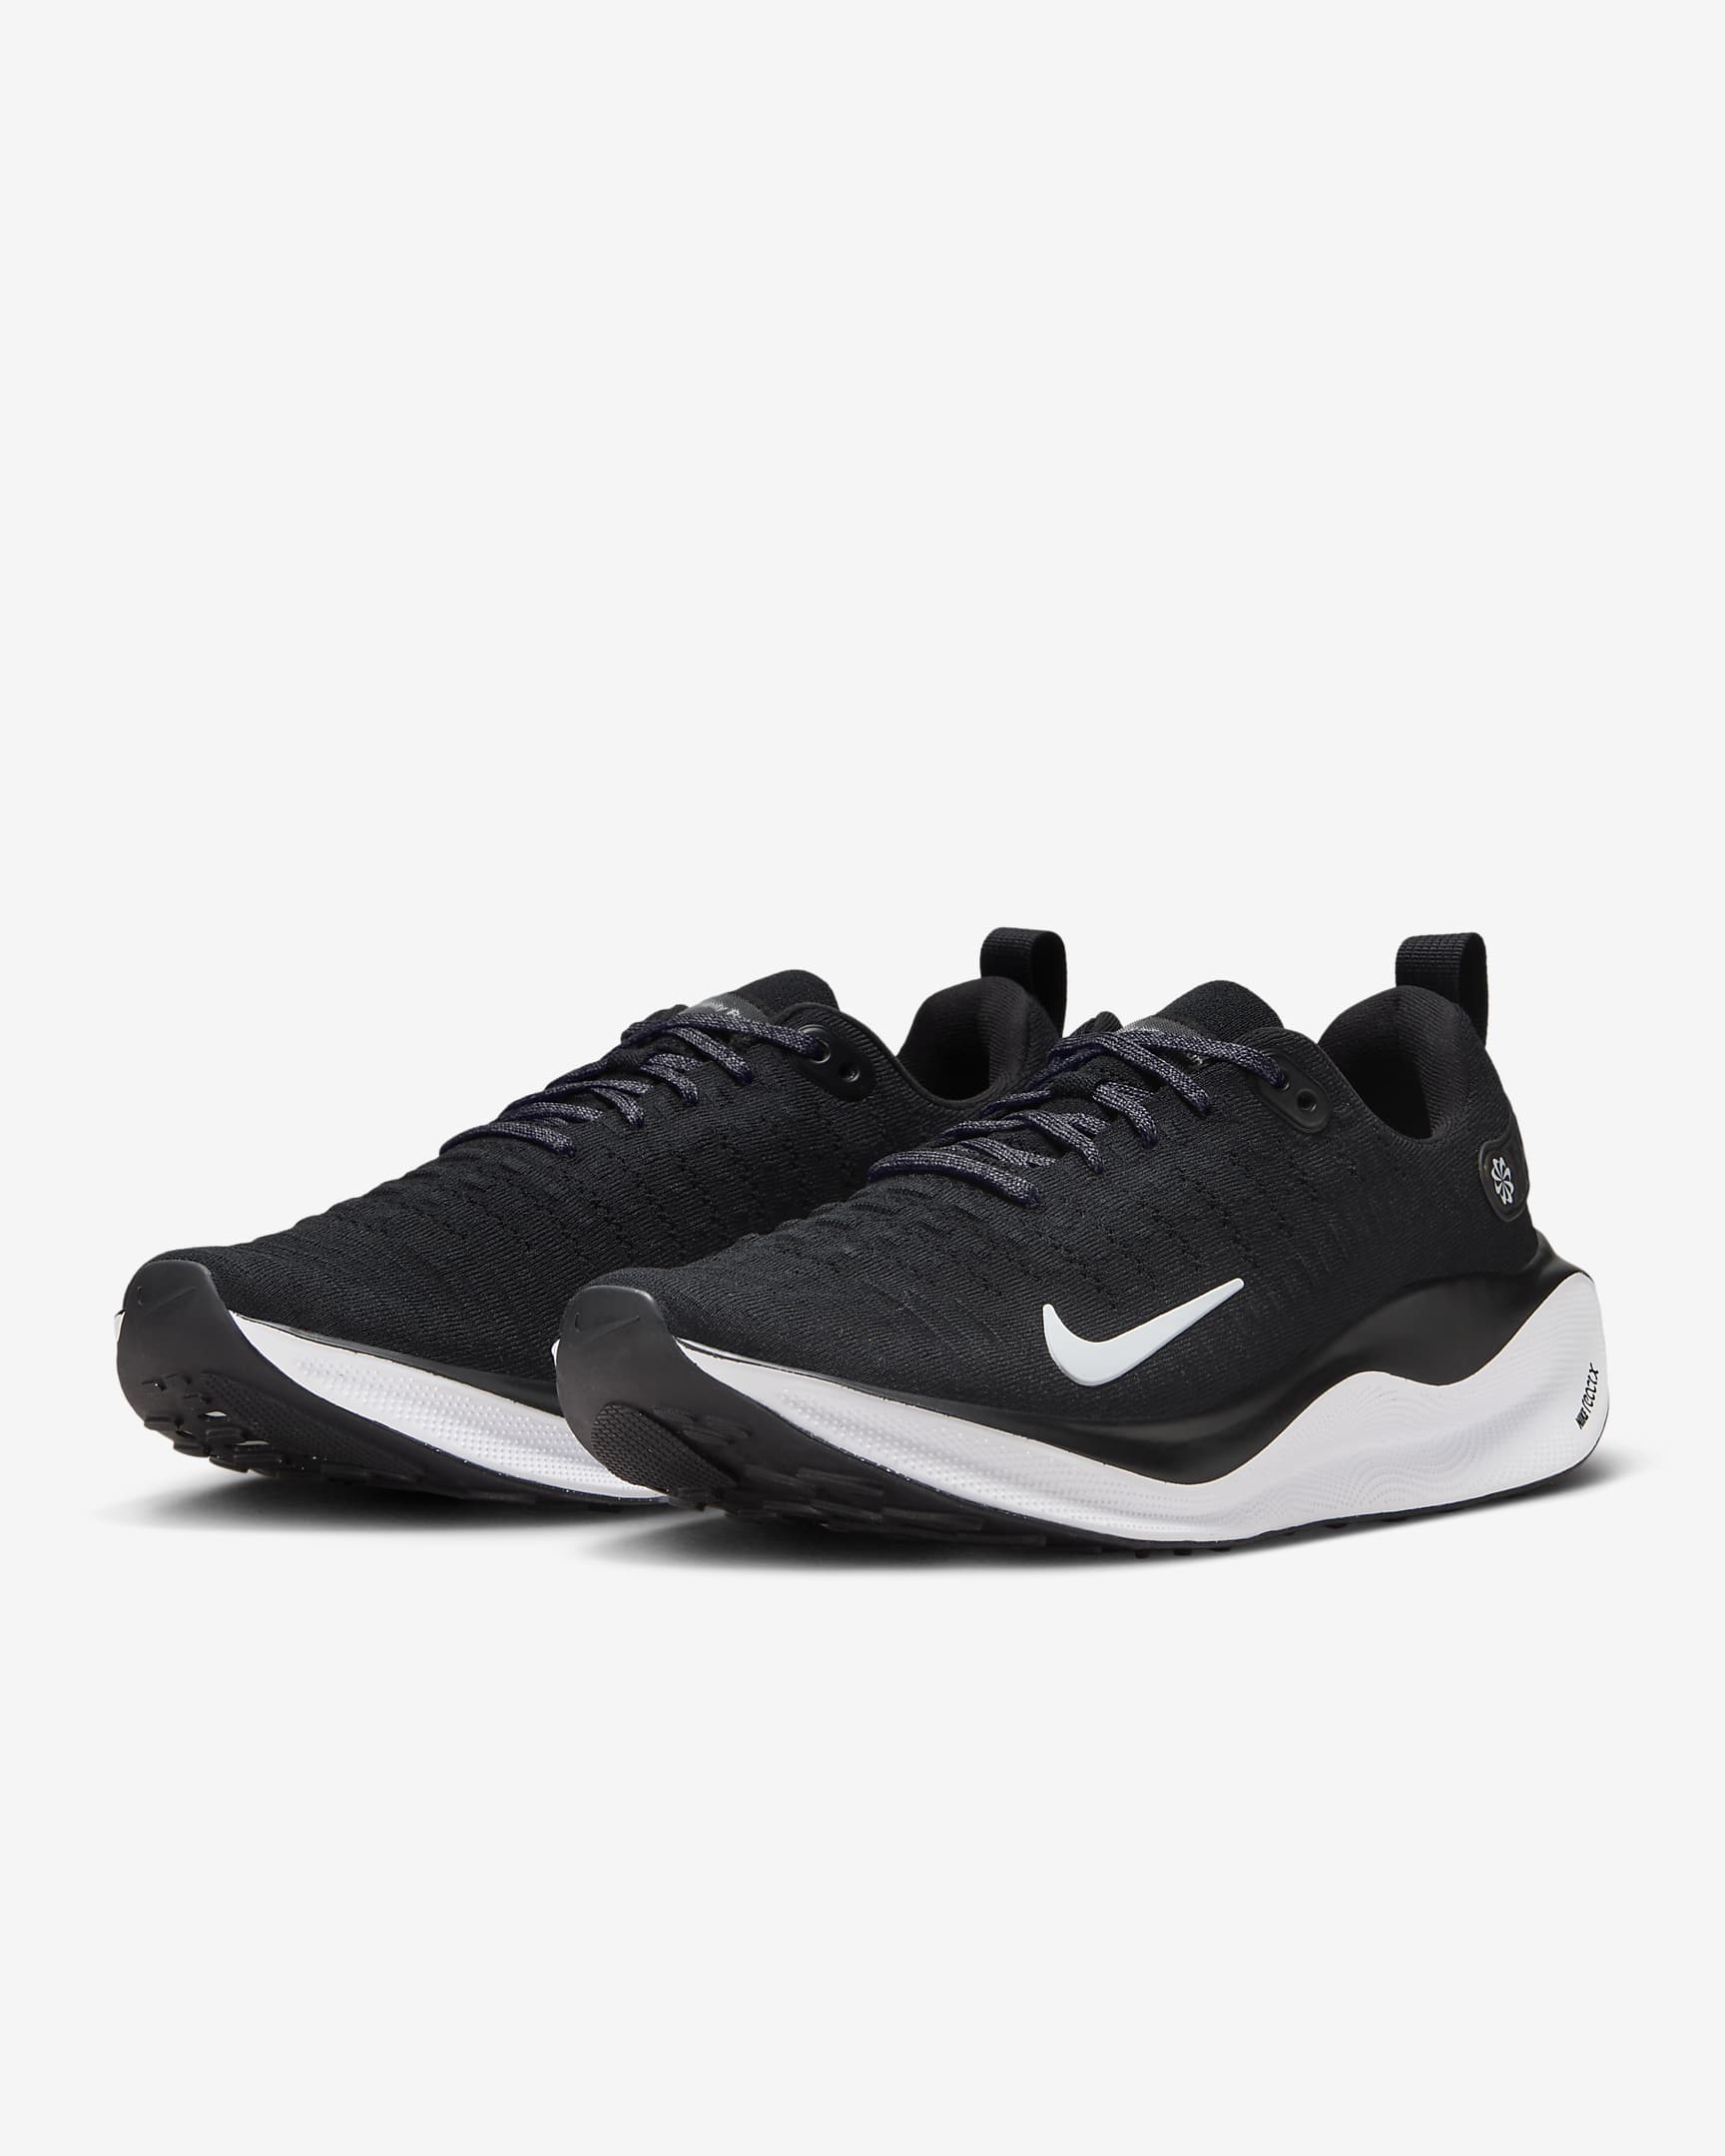 Nike InfinityRN 4 Men's Road Running Shoes (Extra Wide) - Black/White